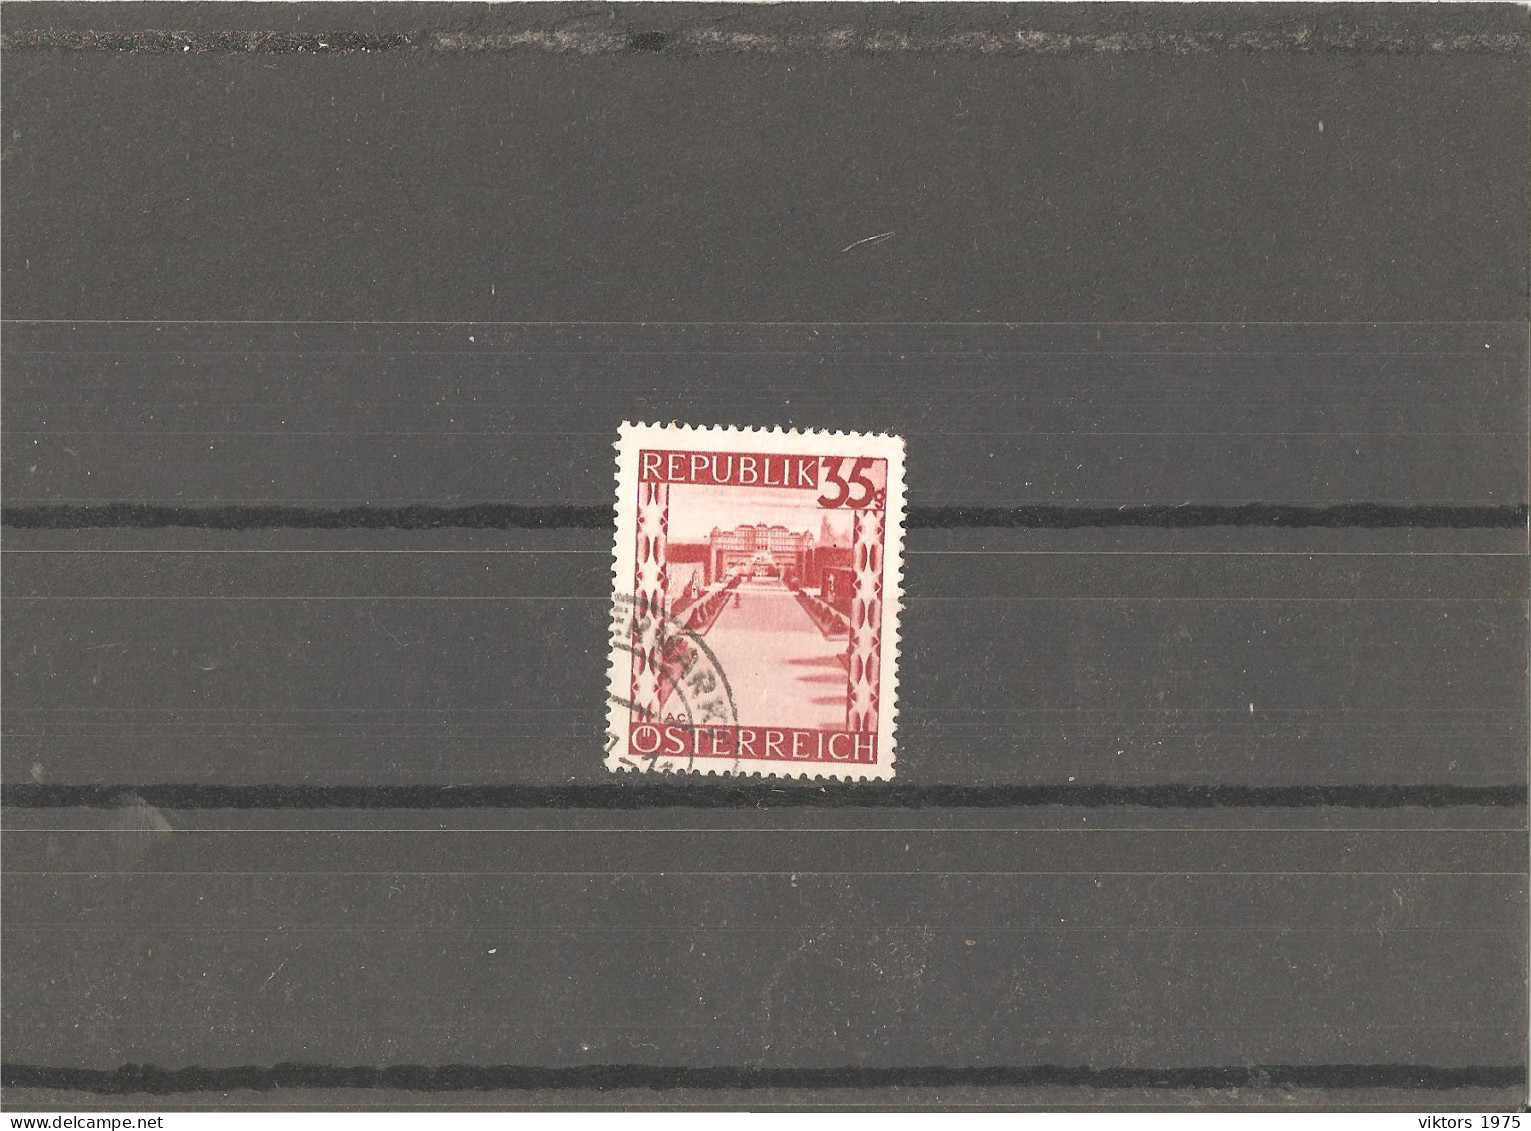 Used Stamp Nr.755 In MICHEL Catalog - Used Stamps